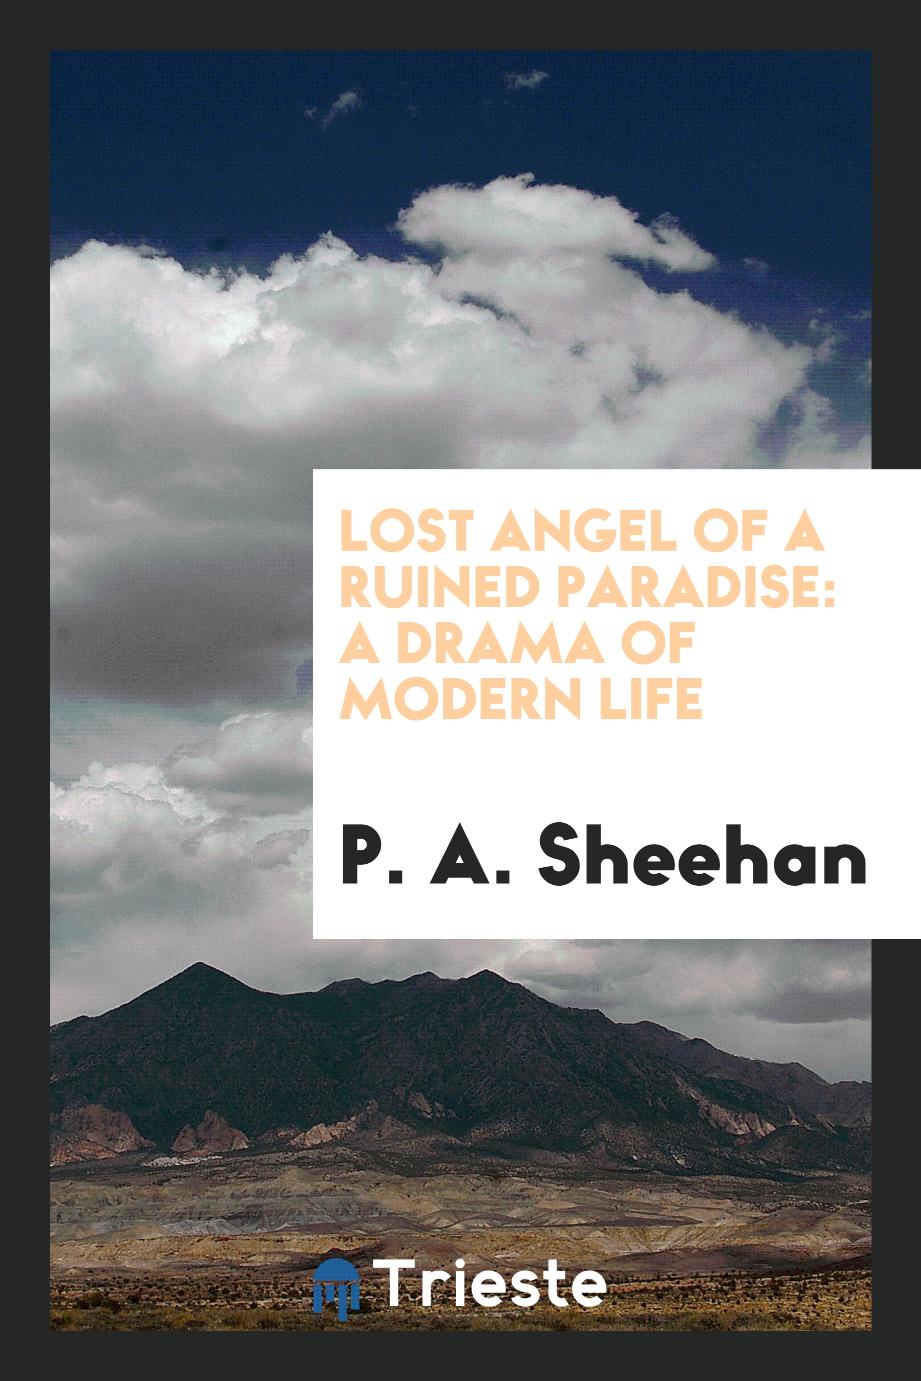 Lost Angel of a Ruined Paradise: A Drama of Modern Life